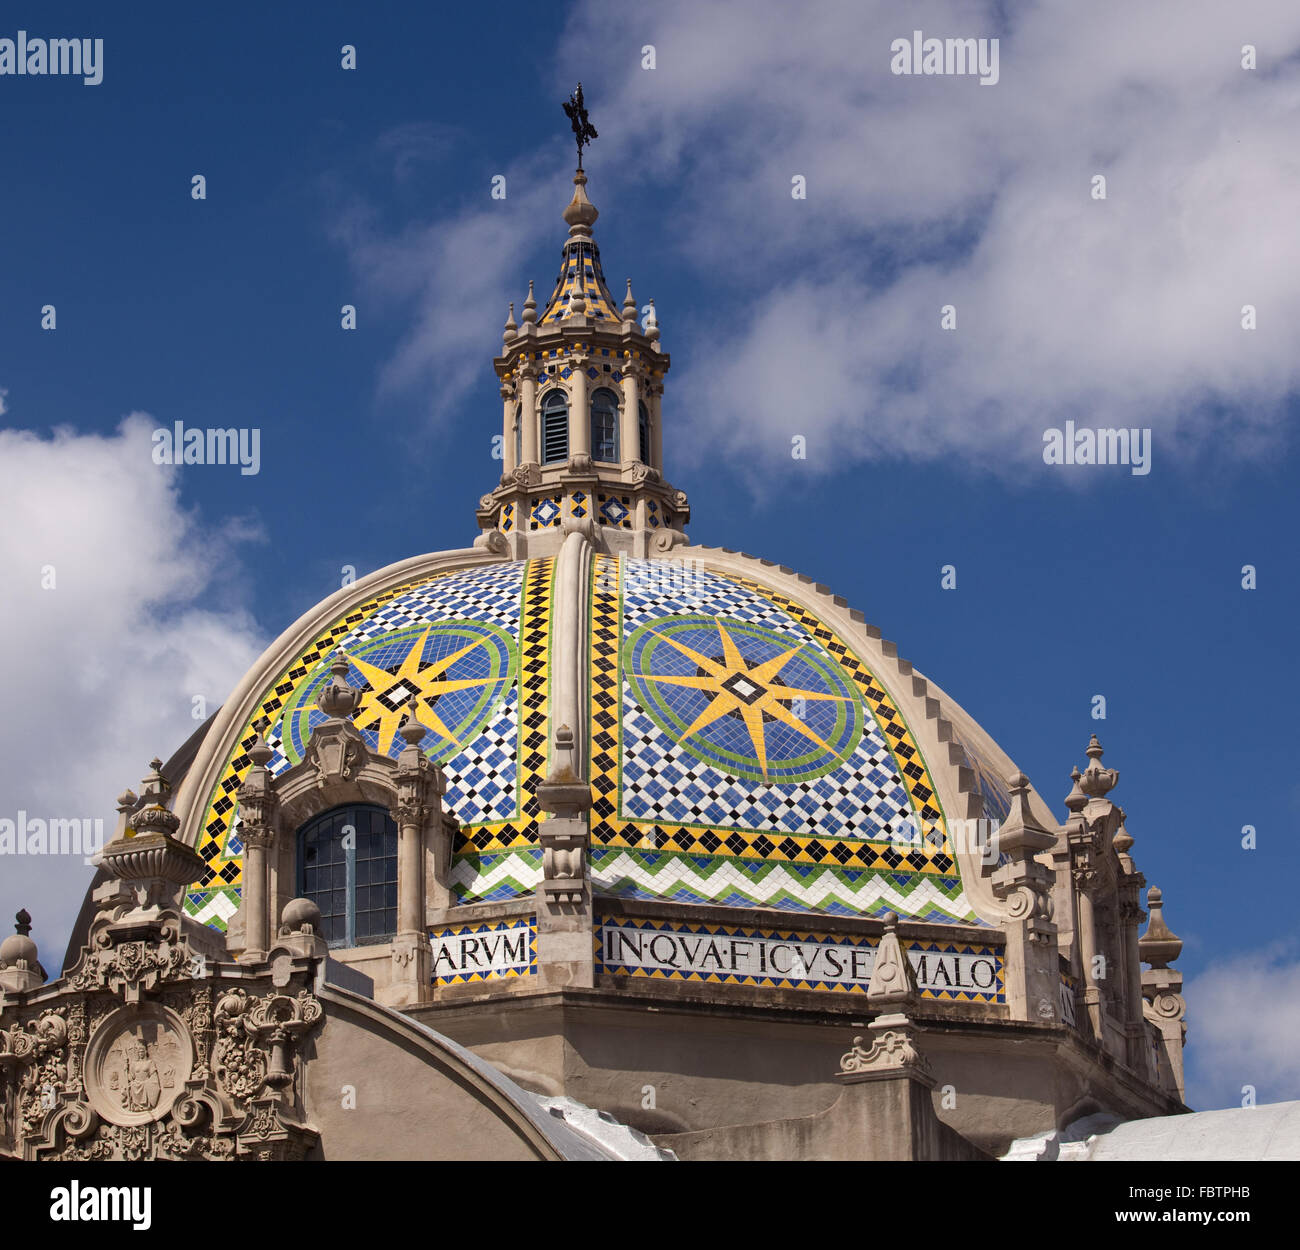 View of the ornatedome on Museum of Man in Balboa Park in San Diego Stock Photo